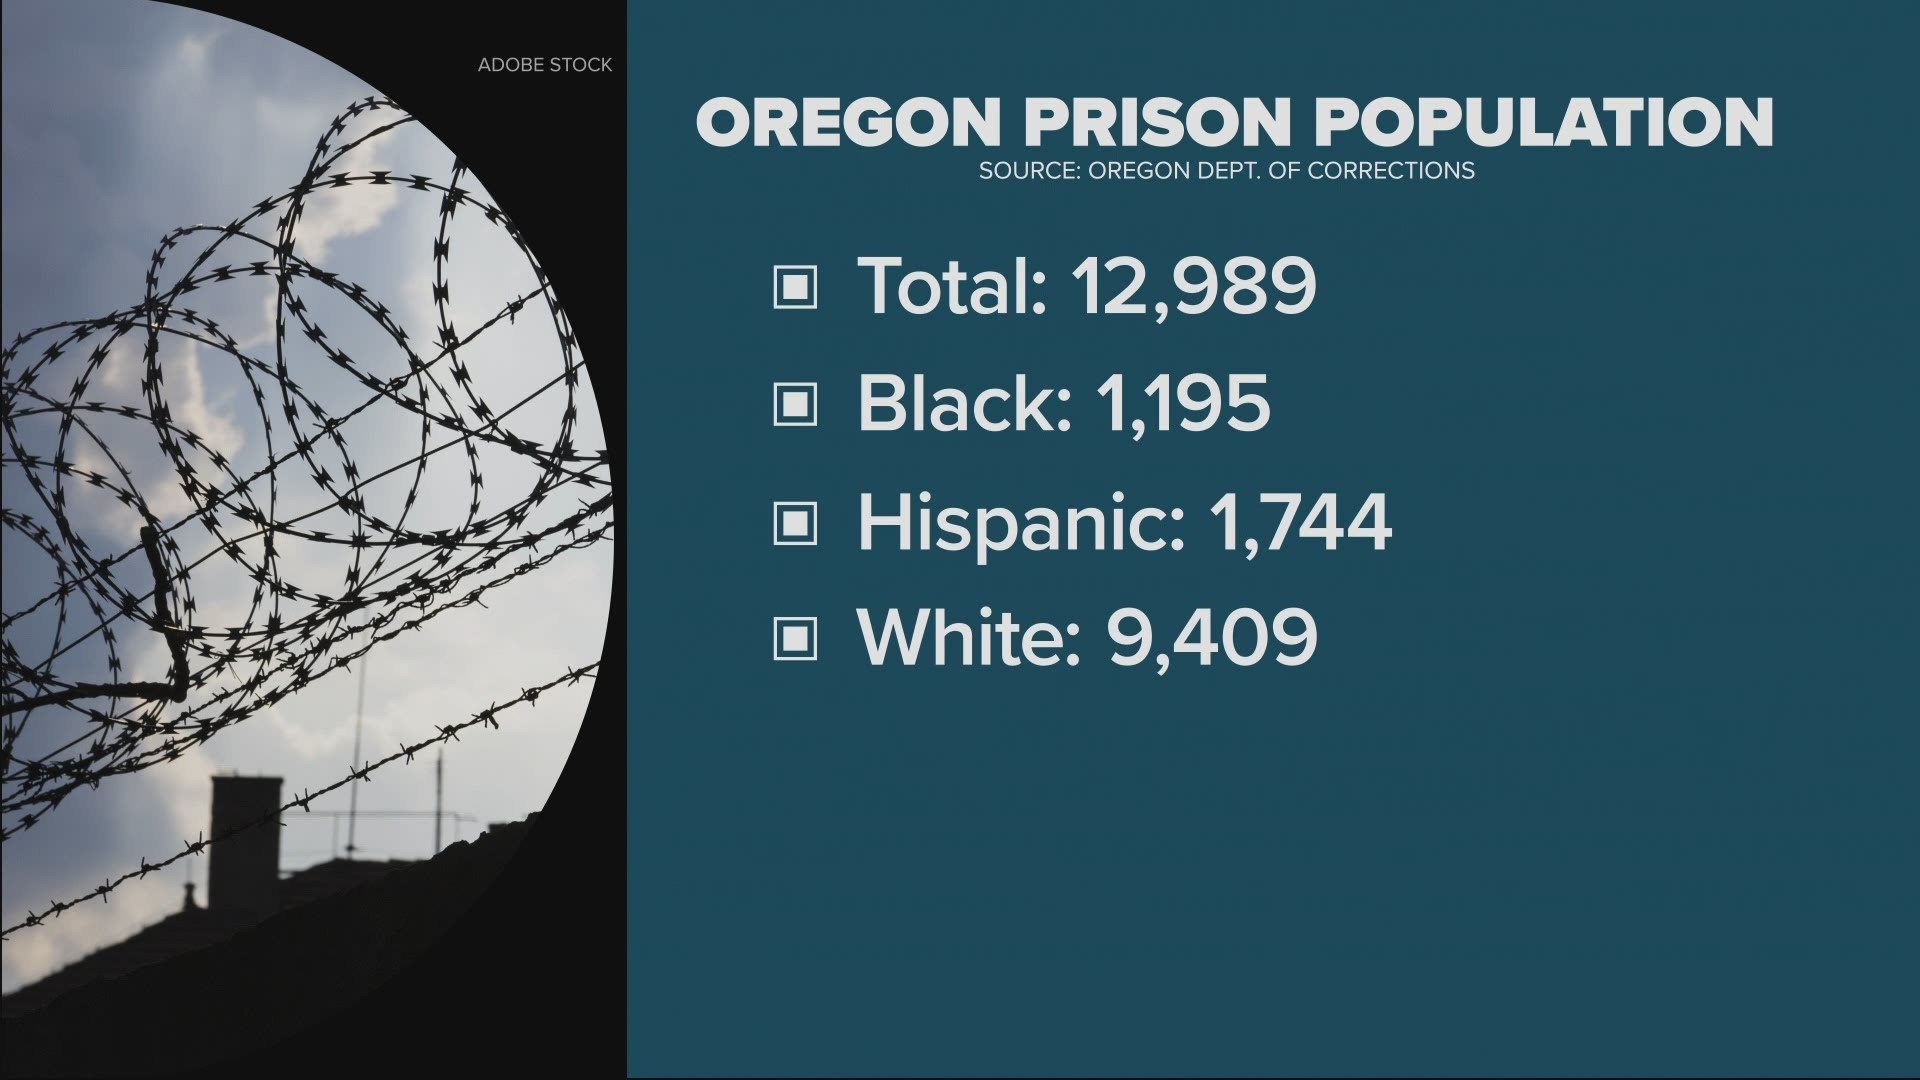 If it becomes law, Oregon would be one of the only states in the country to allow prisoners to vote.